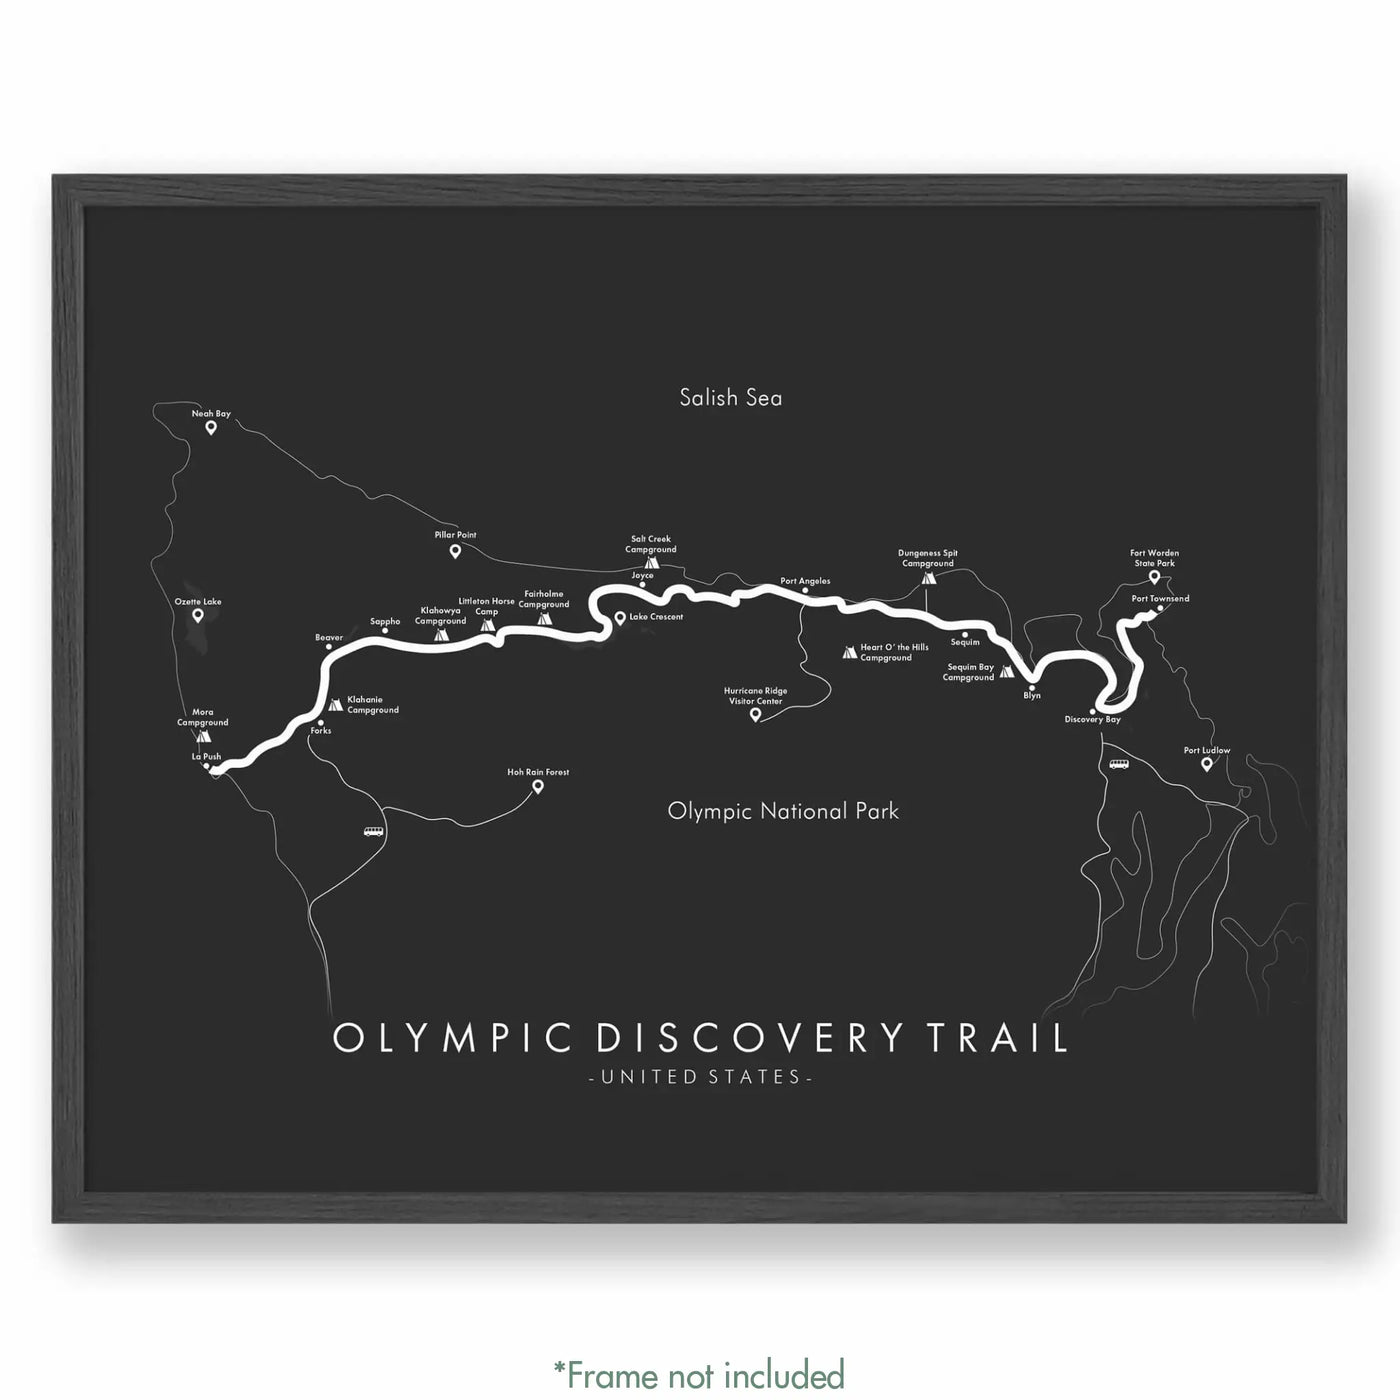 Trail Poster of Olympic Discovery Trail - Grey